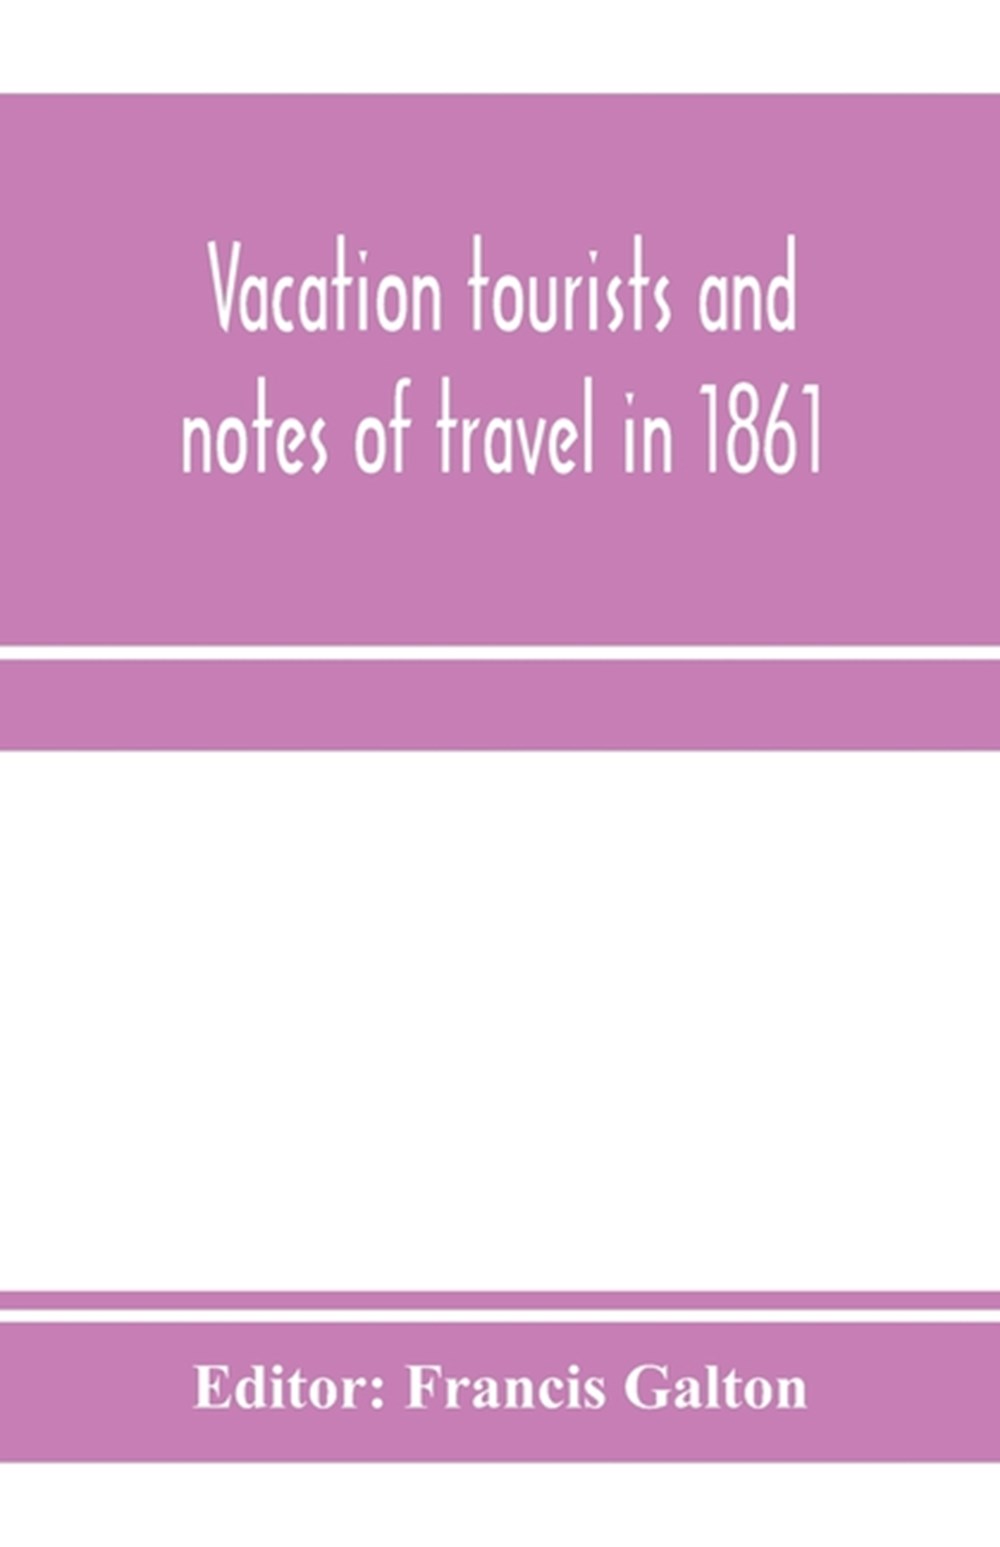 Vacation tourists and notes of travel in 1861